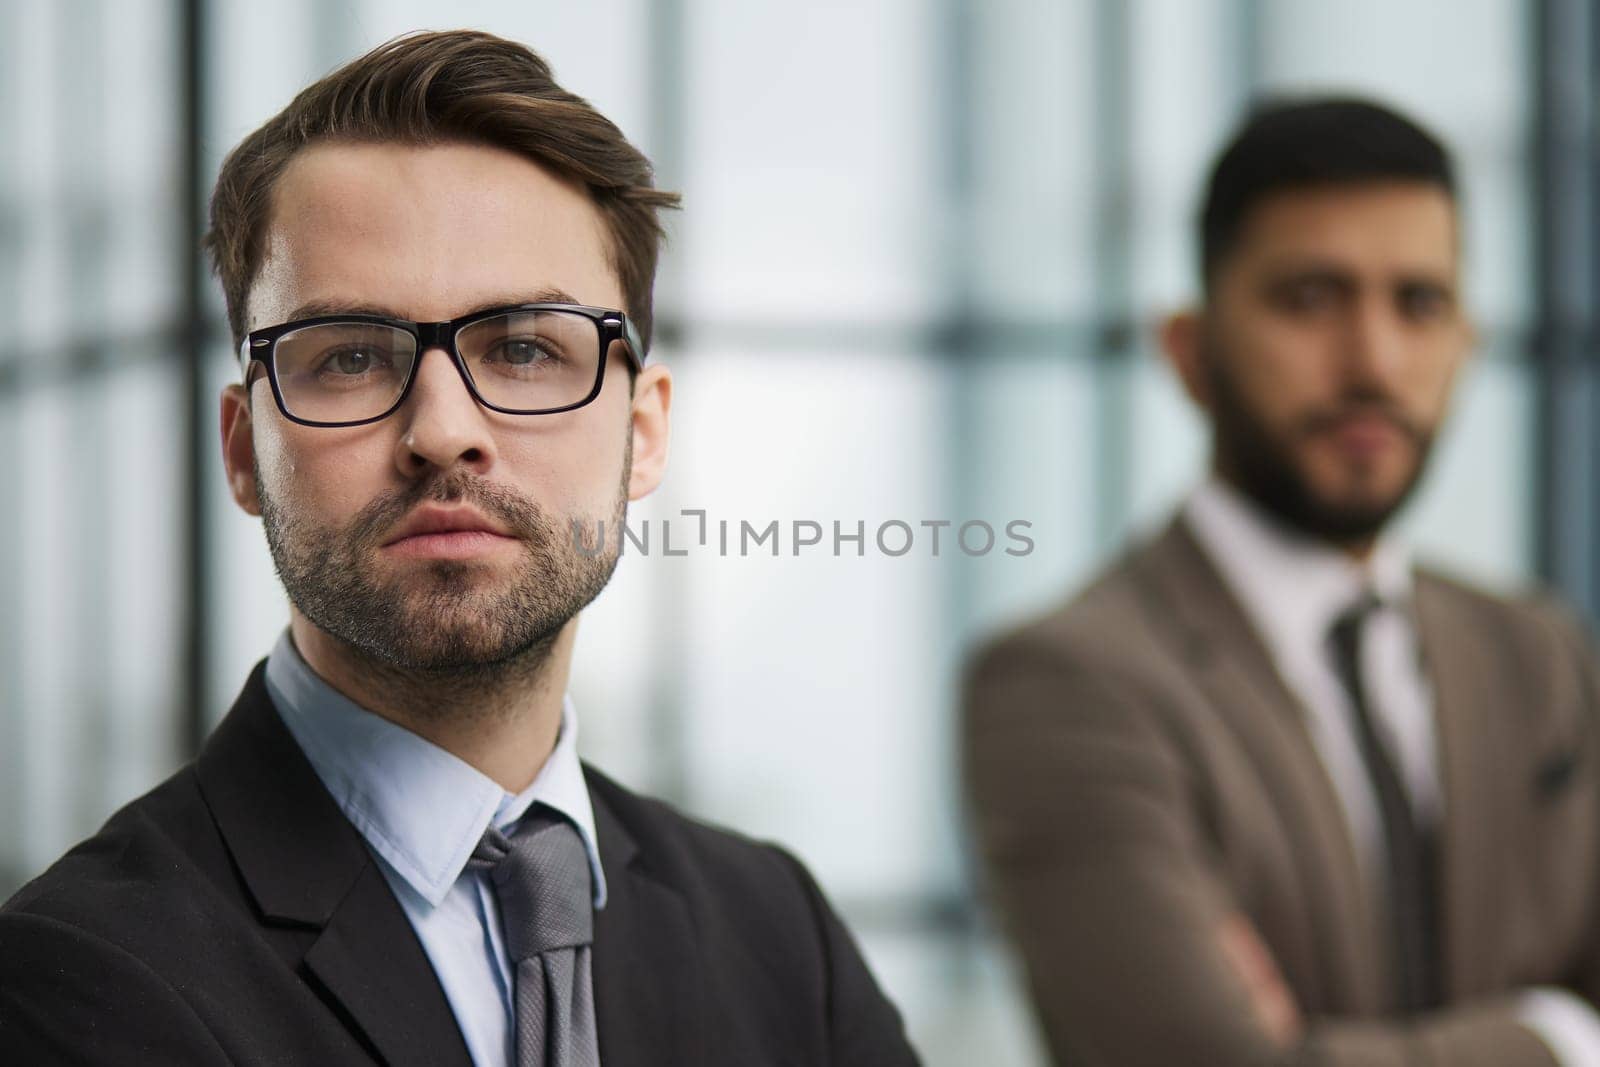 Portrait male worker looking at camera, positive employee posing for company business directory with co-workers